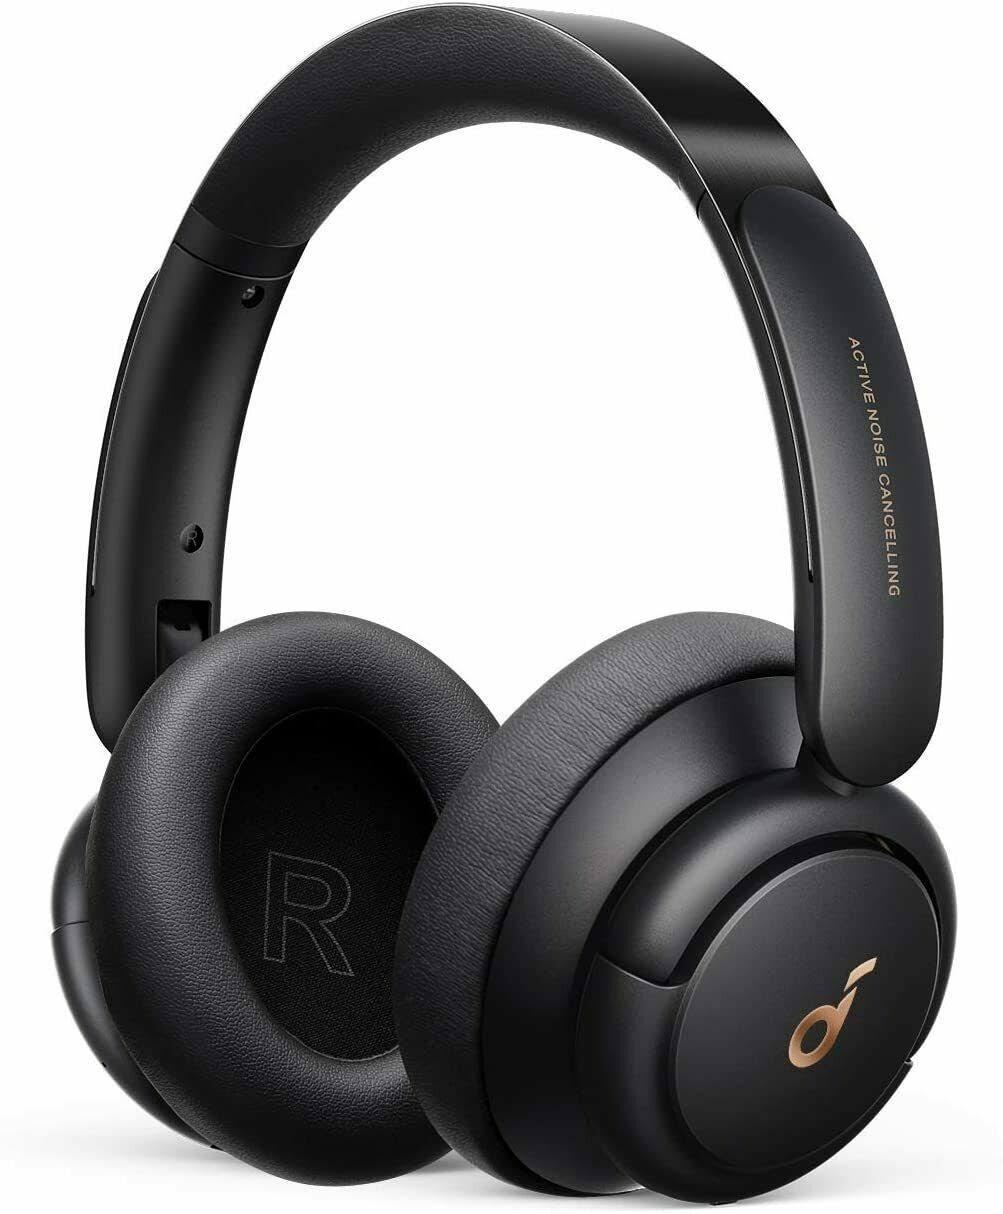 If you’re on the lookout for a great pair of noise-canceling headphones with fantastic audio, you’re probably excited that Amazon Prime Day is here, with the 48-hour shopping extravaganza to be held on July 12-13. fad74a58 mmw789dq73